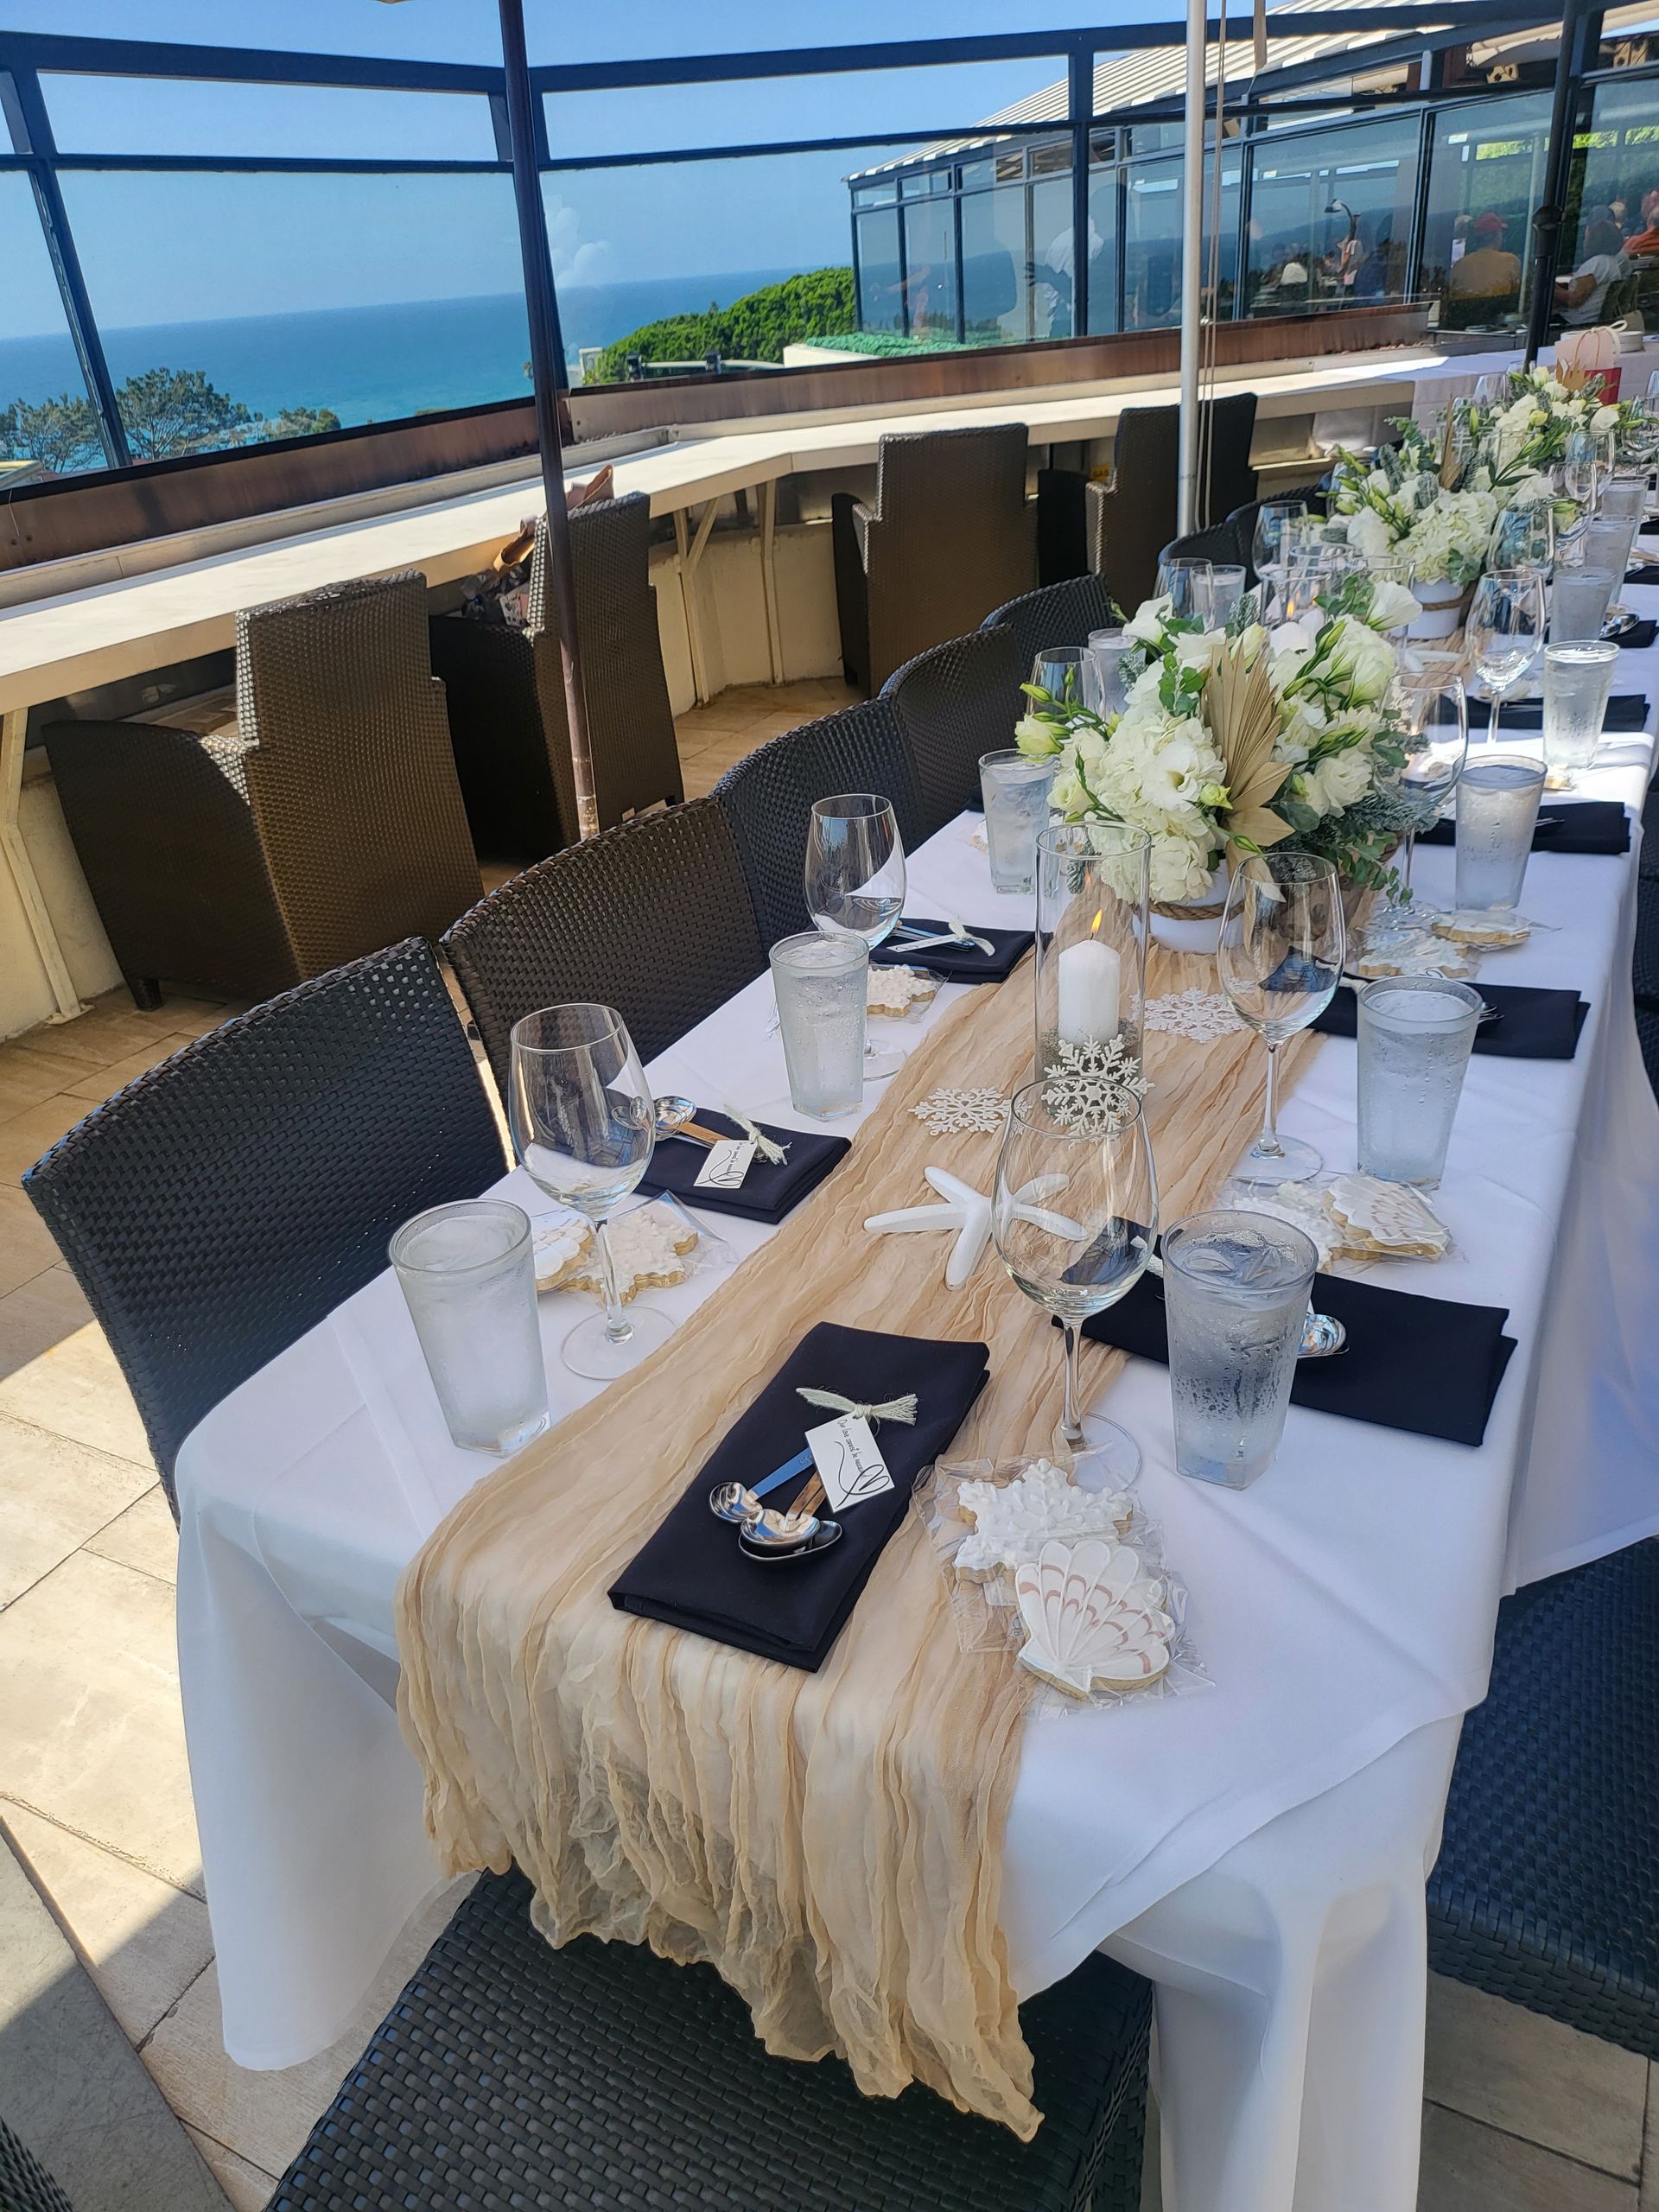 A long table with a table runner and flowers on it